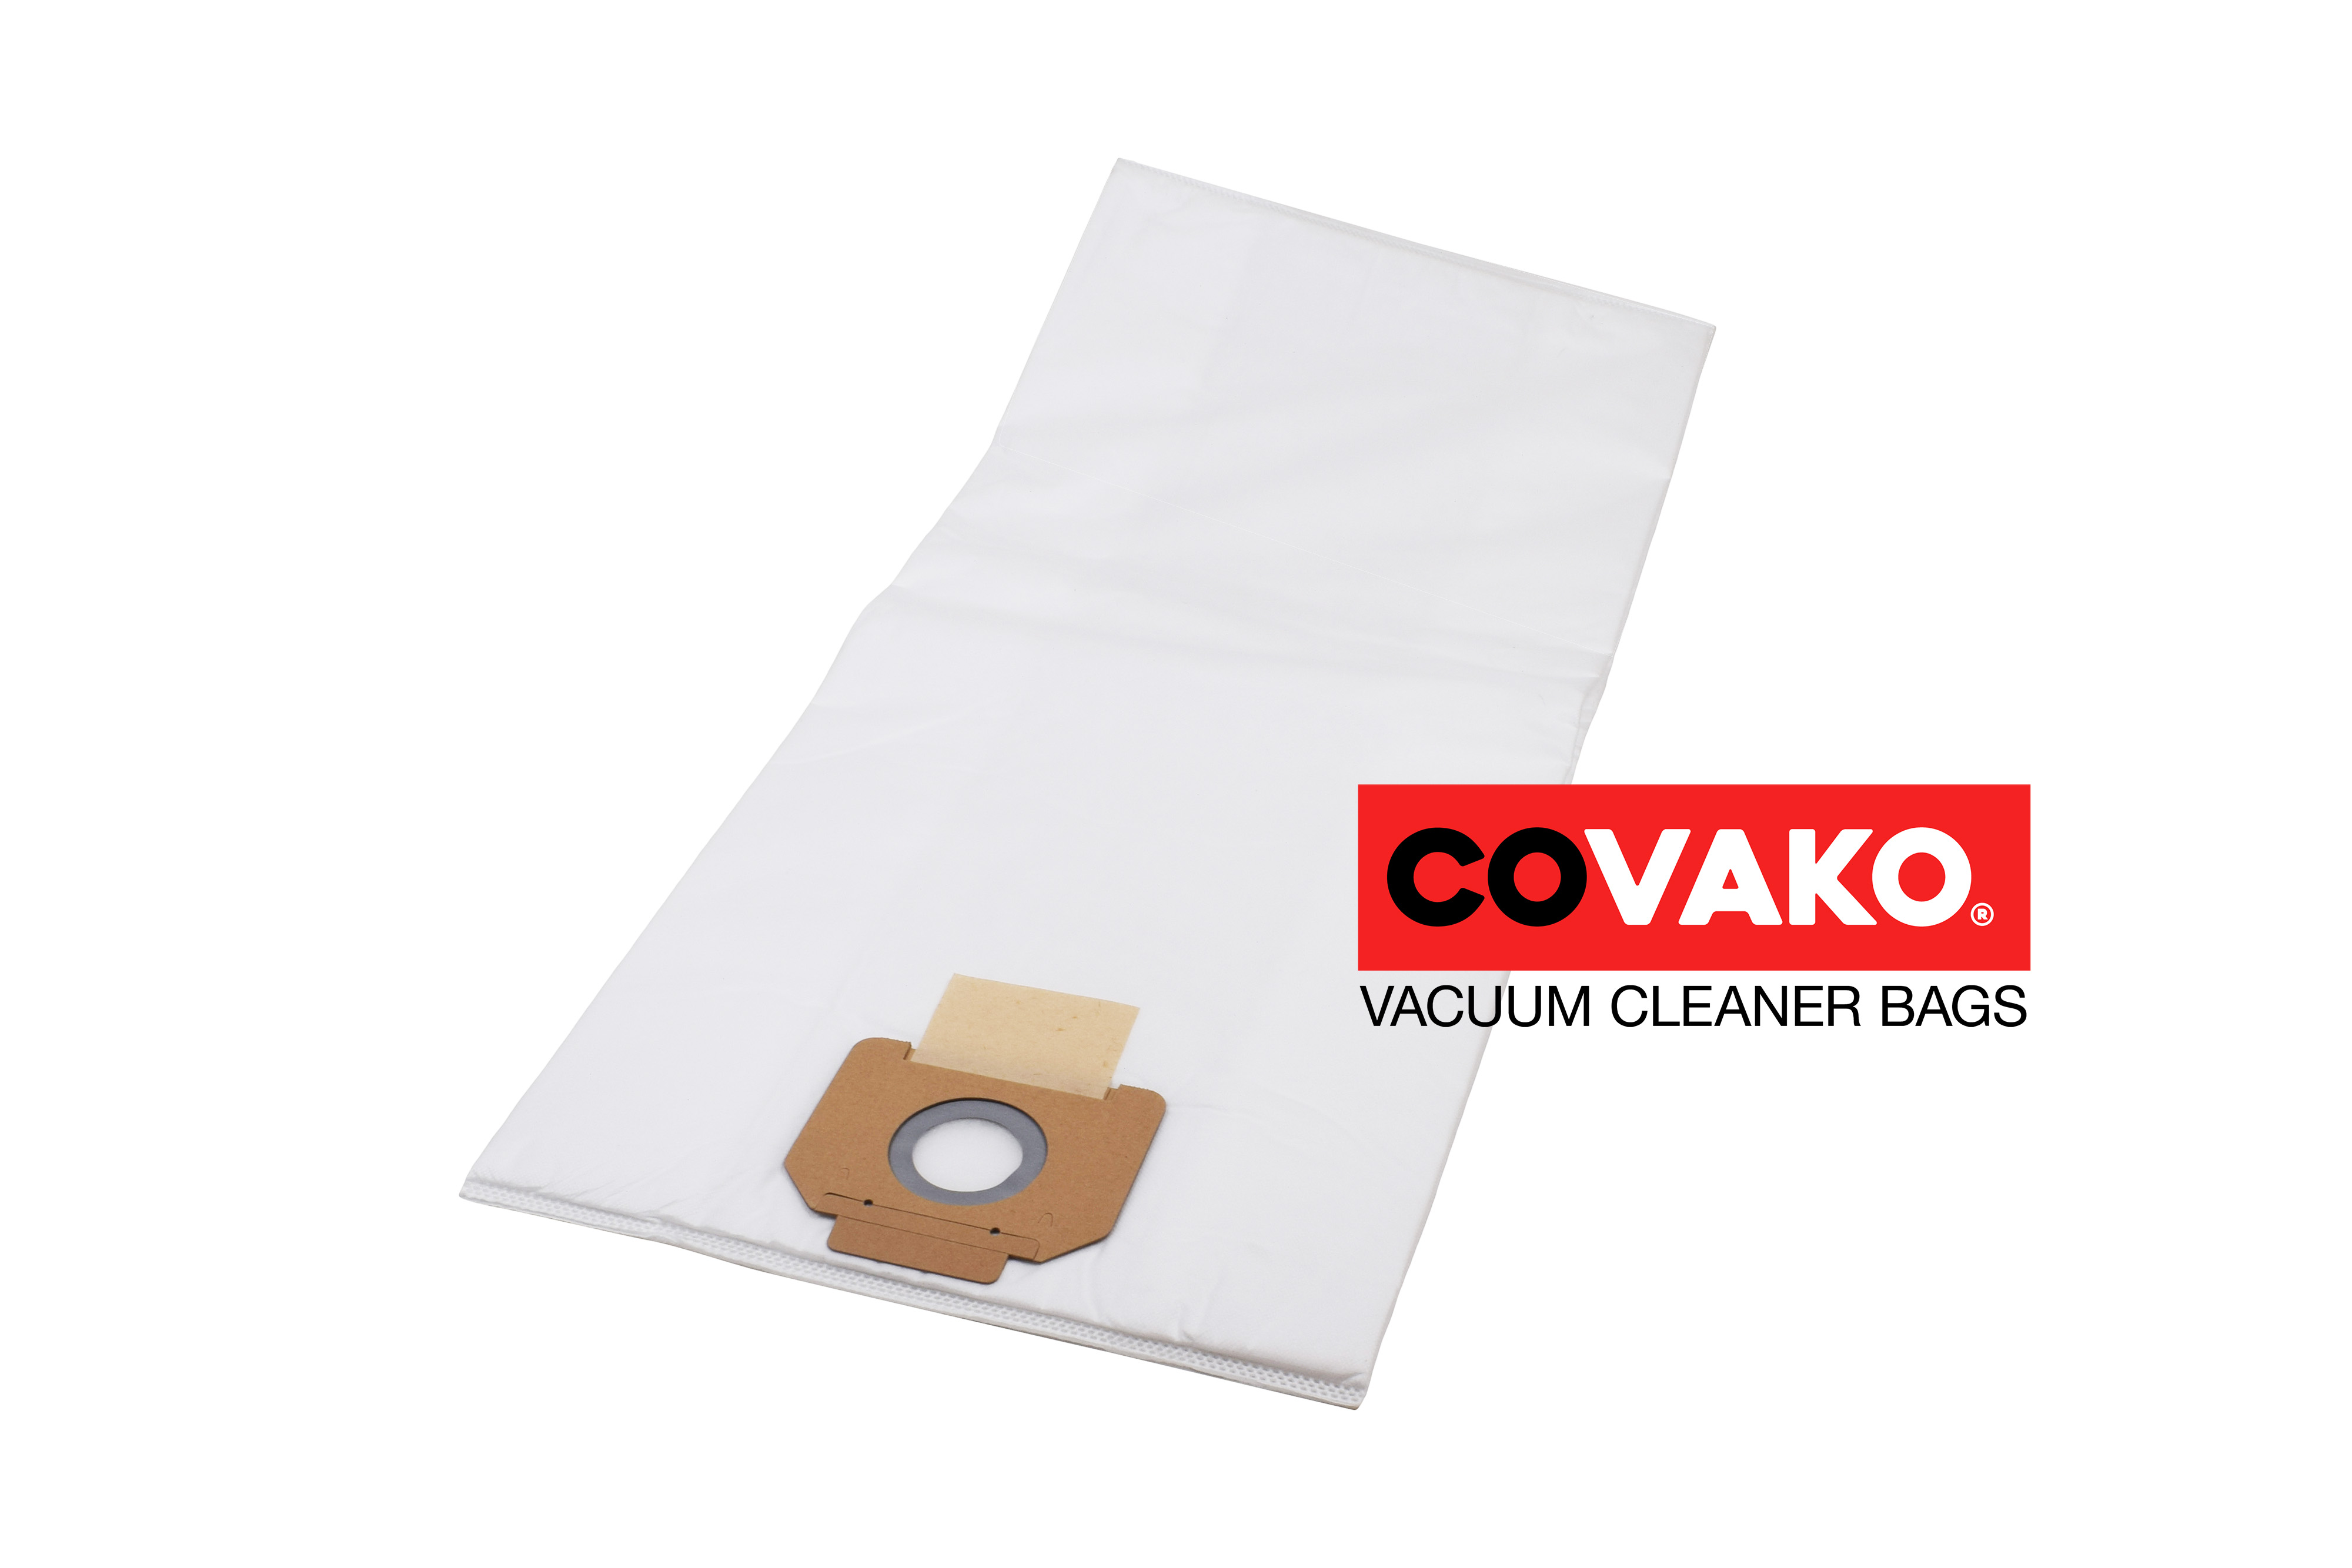 Gansow GS 3/78 W&D / Synthesis - Gansow vacuum cleaner bags